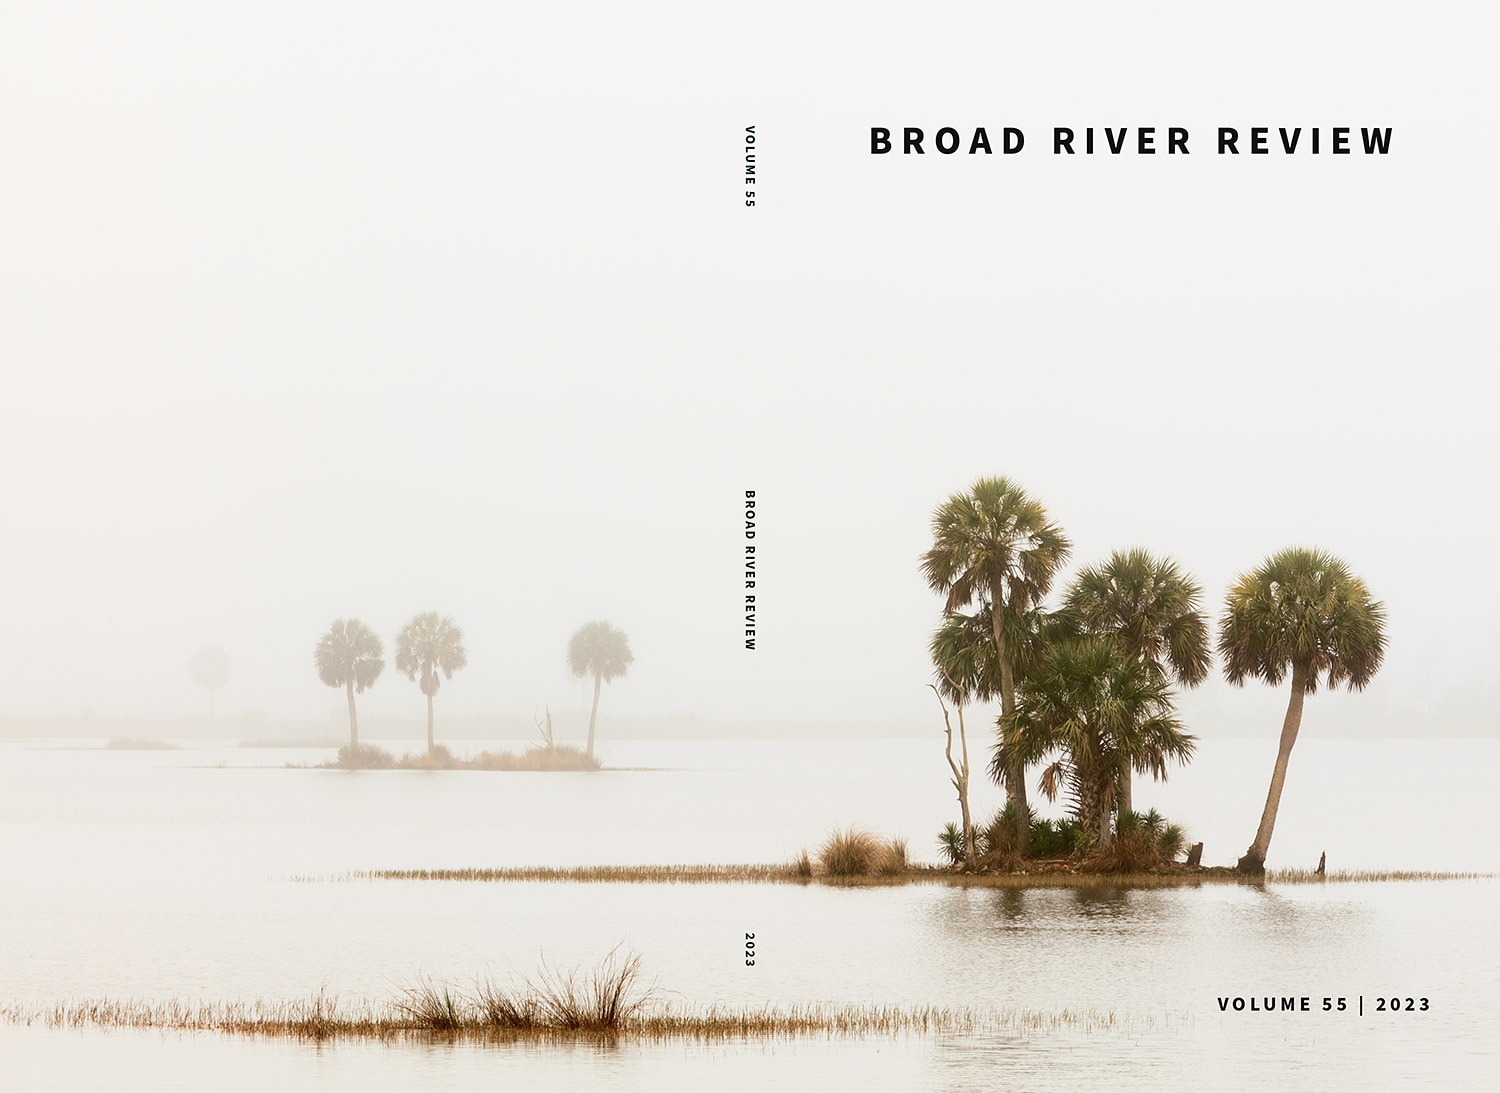 The cover of the 2023 edition of the Broad River Review features a landscape photograph of small palm tree islands enveloped in fog. The image is predominately white and wraps around to the back cover of the publication as well.